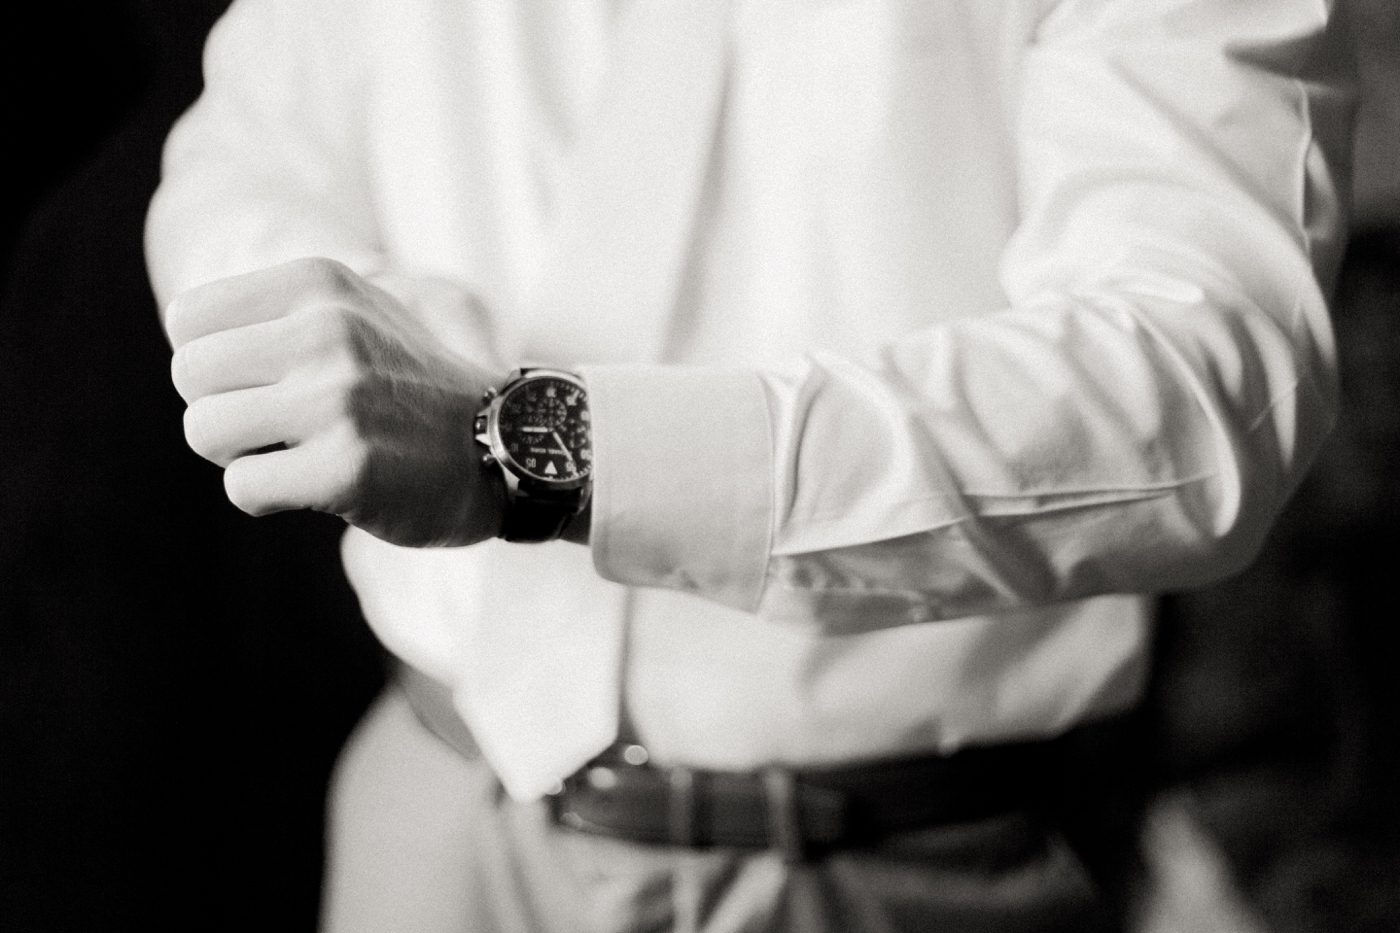 Groom putting on his watch